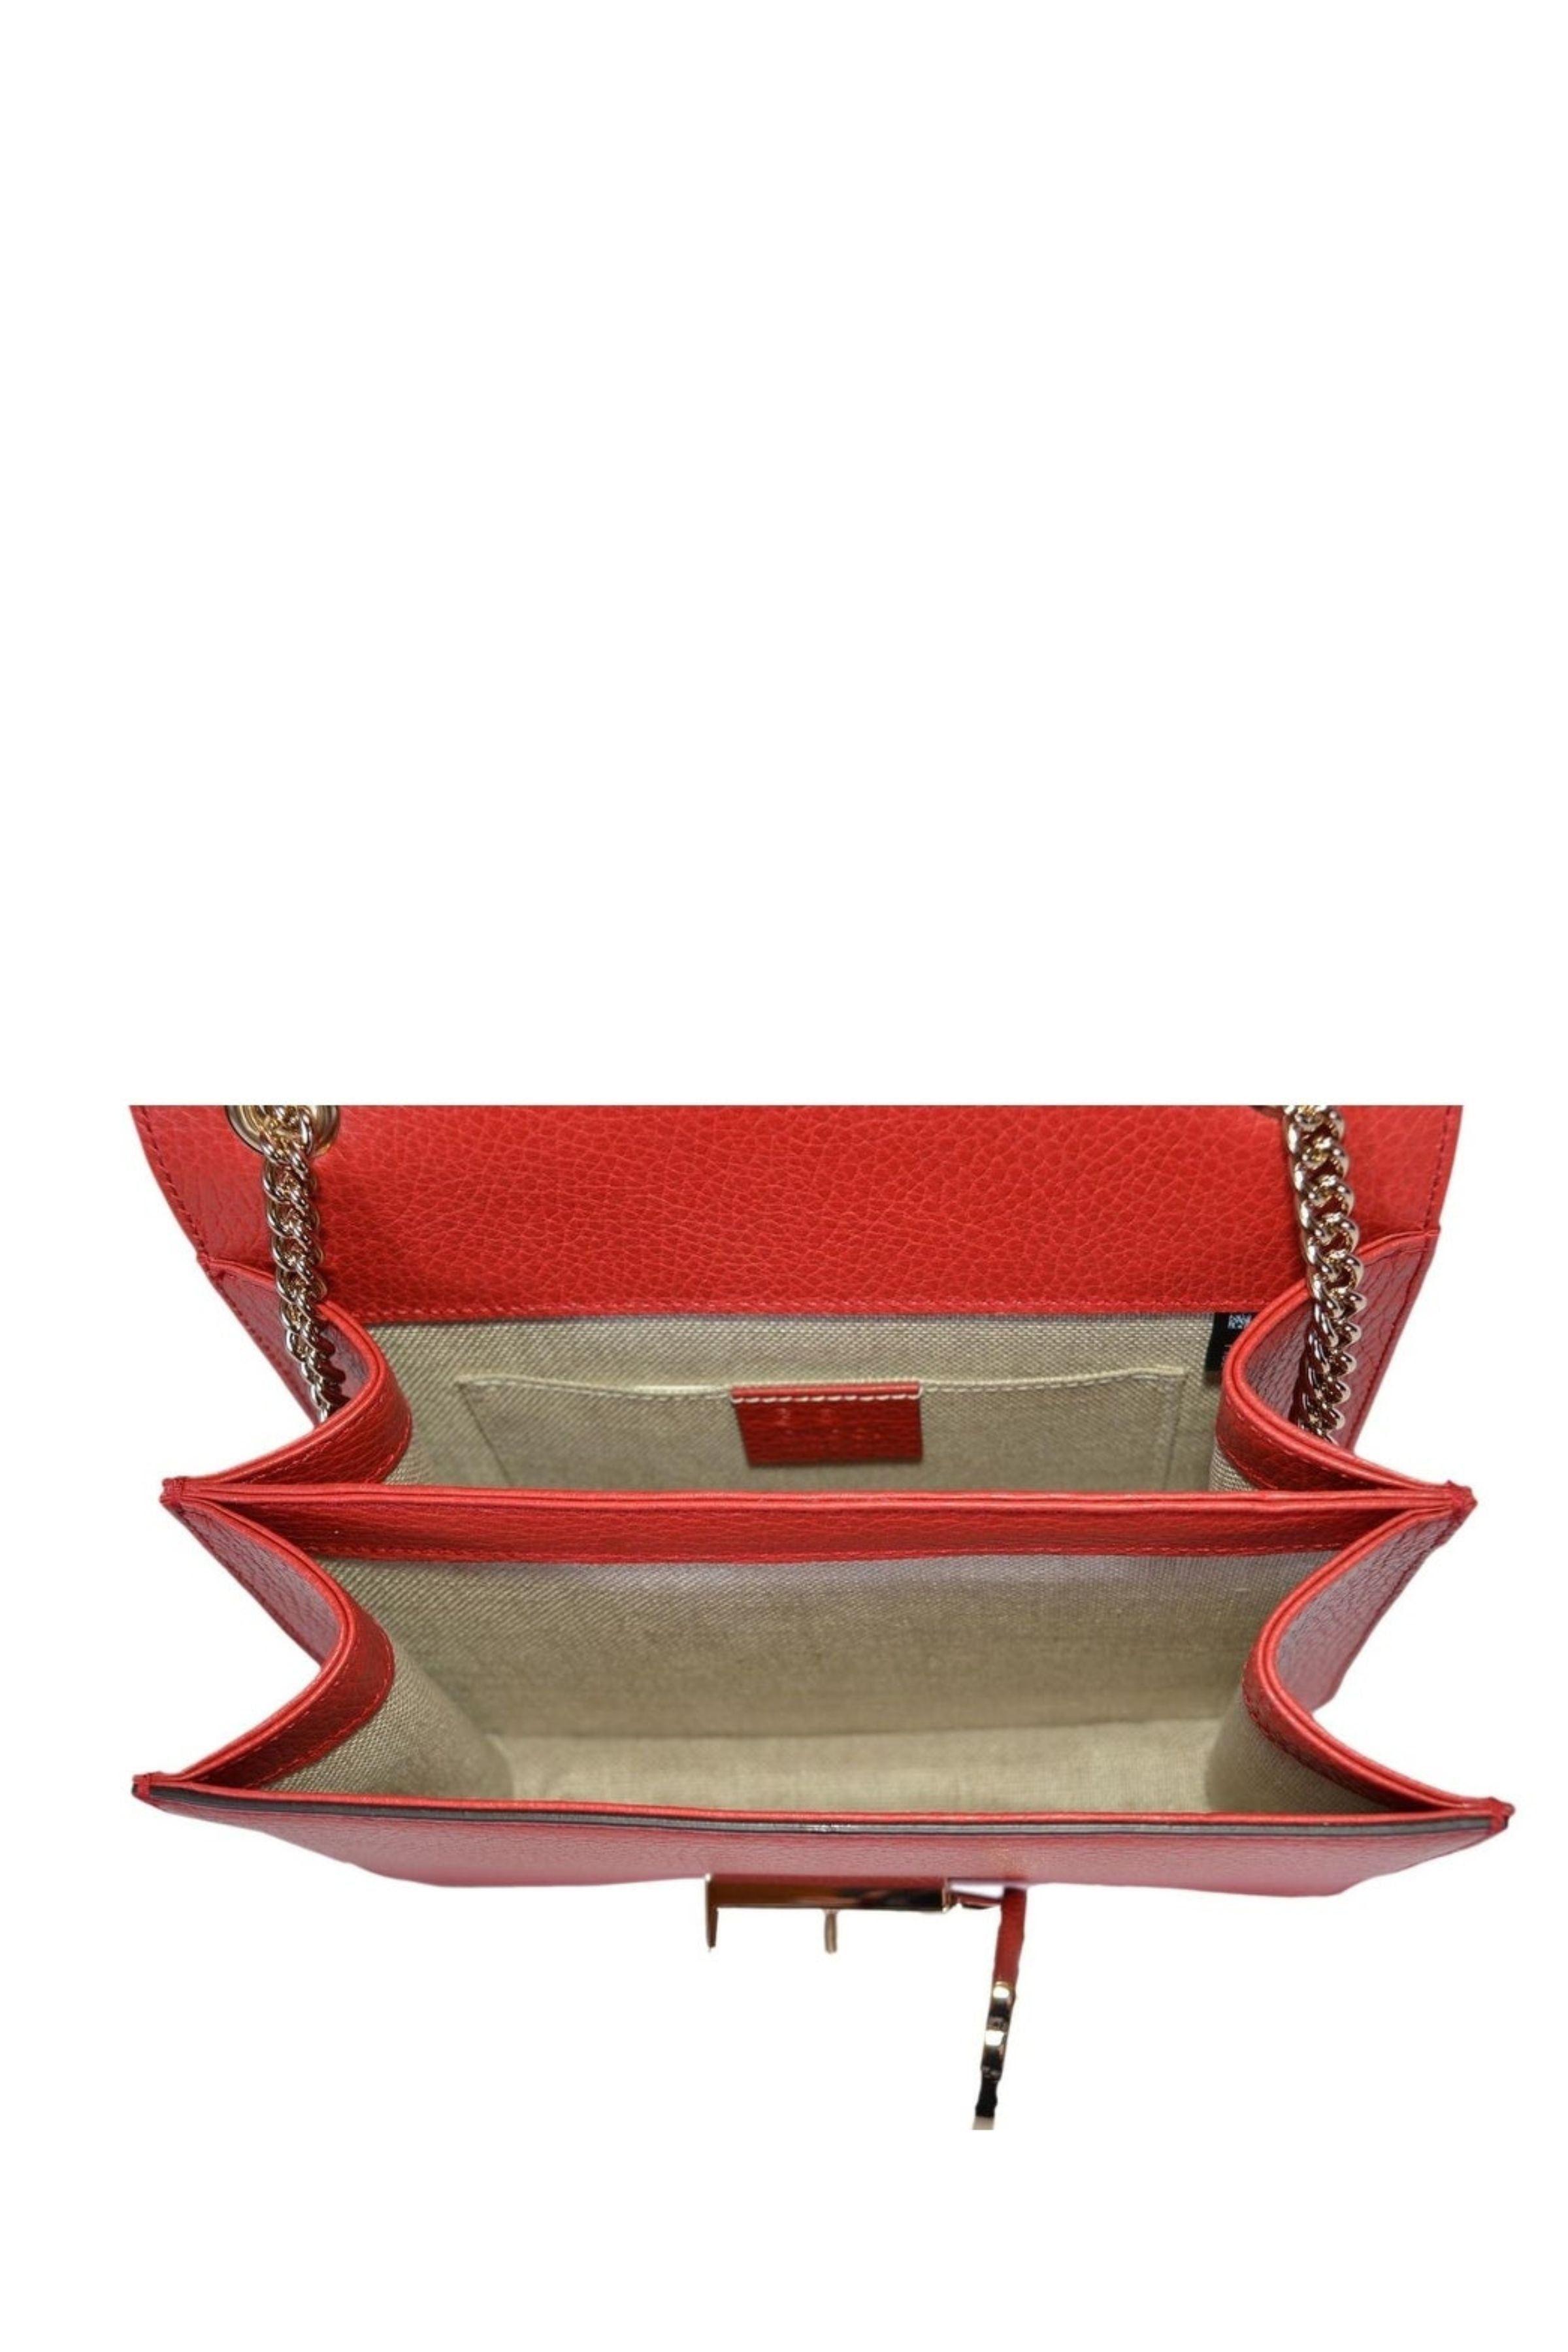 Gucci Small Messenger with Double GG Bag in Red | Runway Catalog